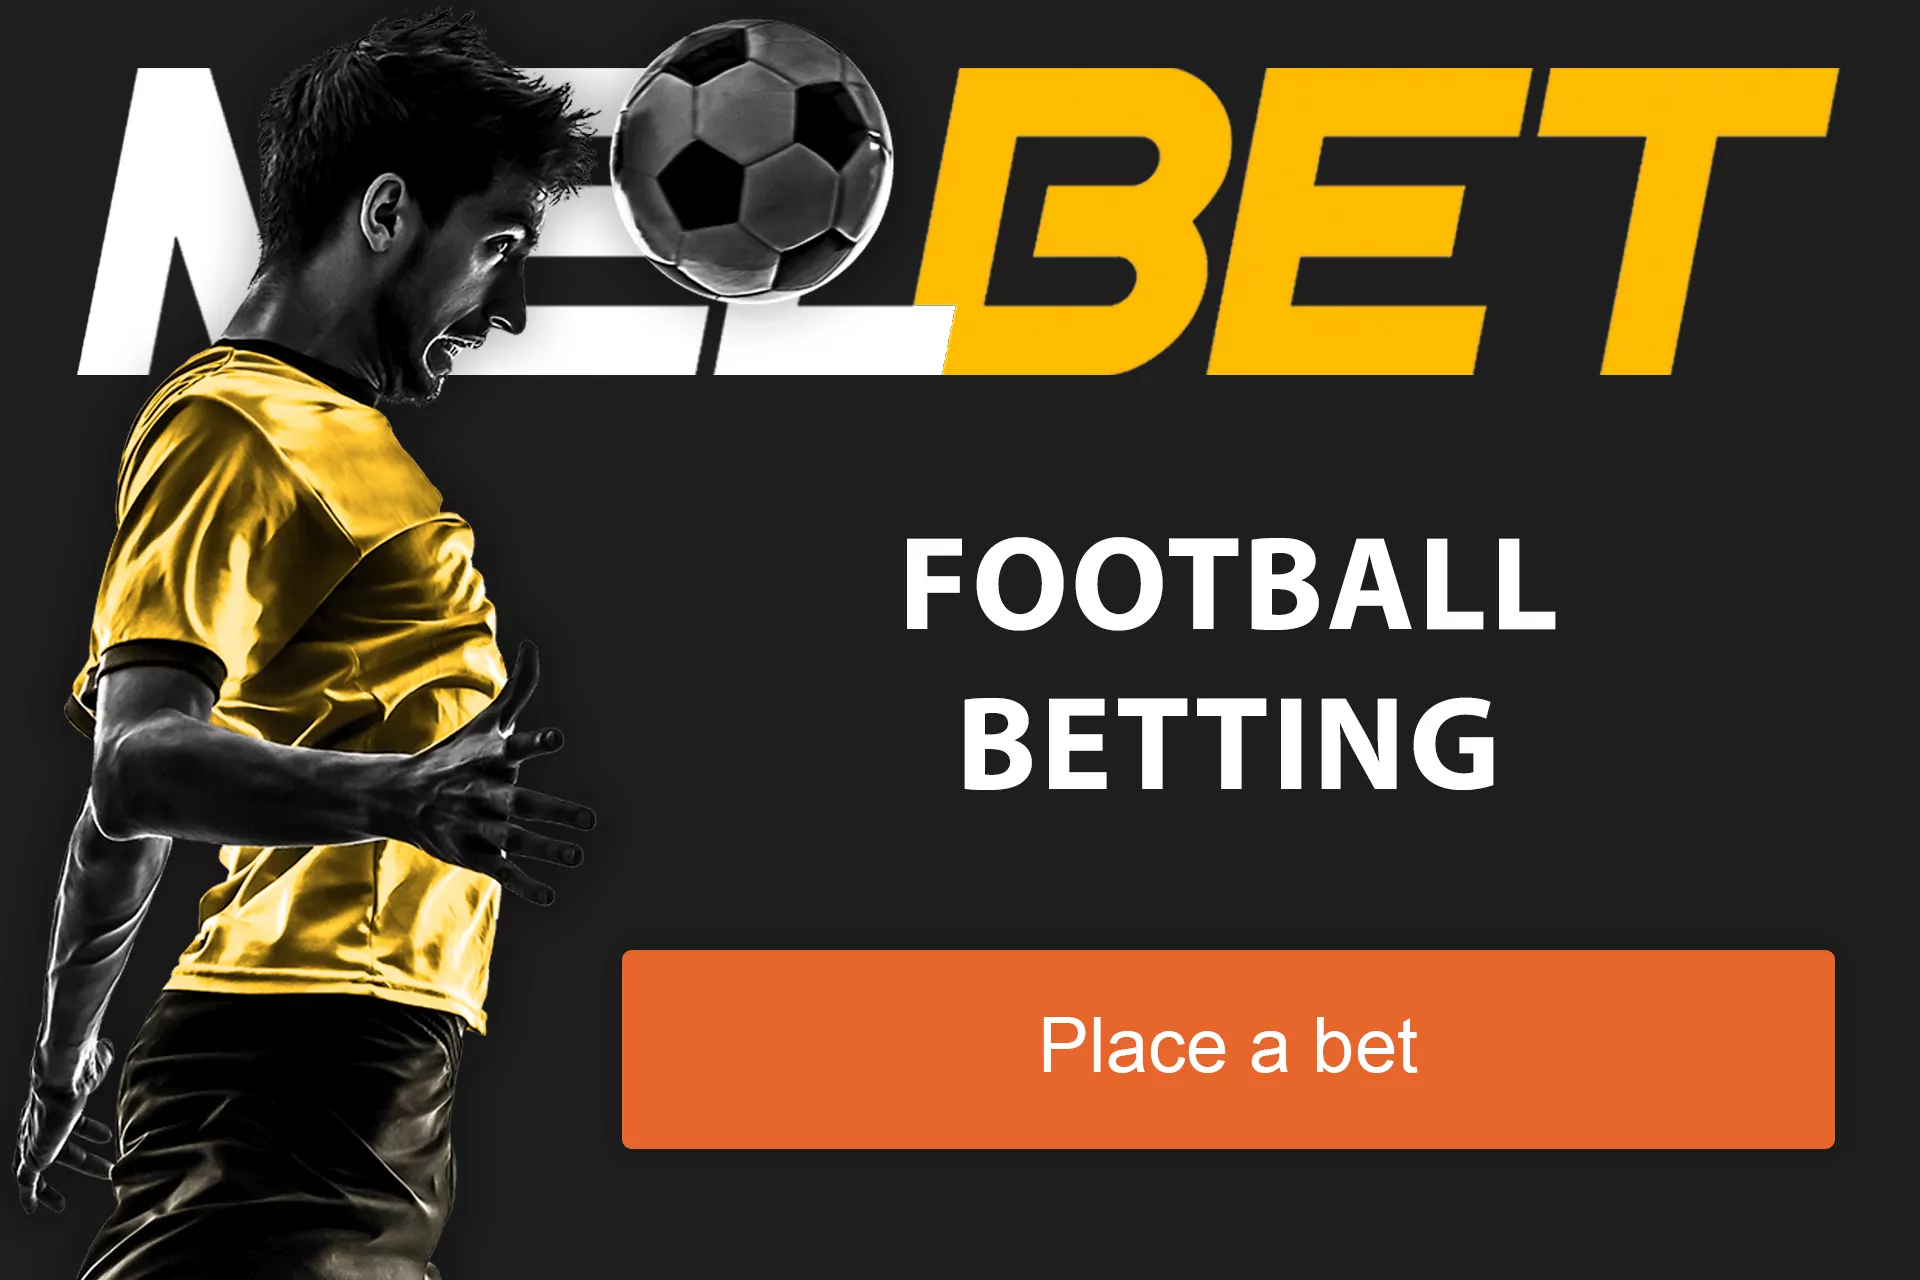 If you are a fan of football, welcome to Melbet as well.